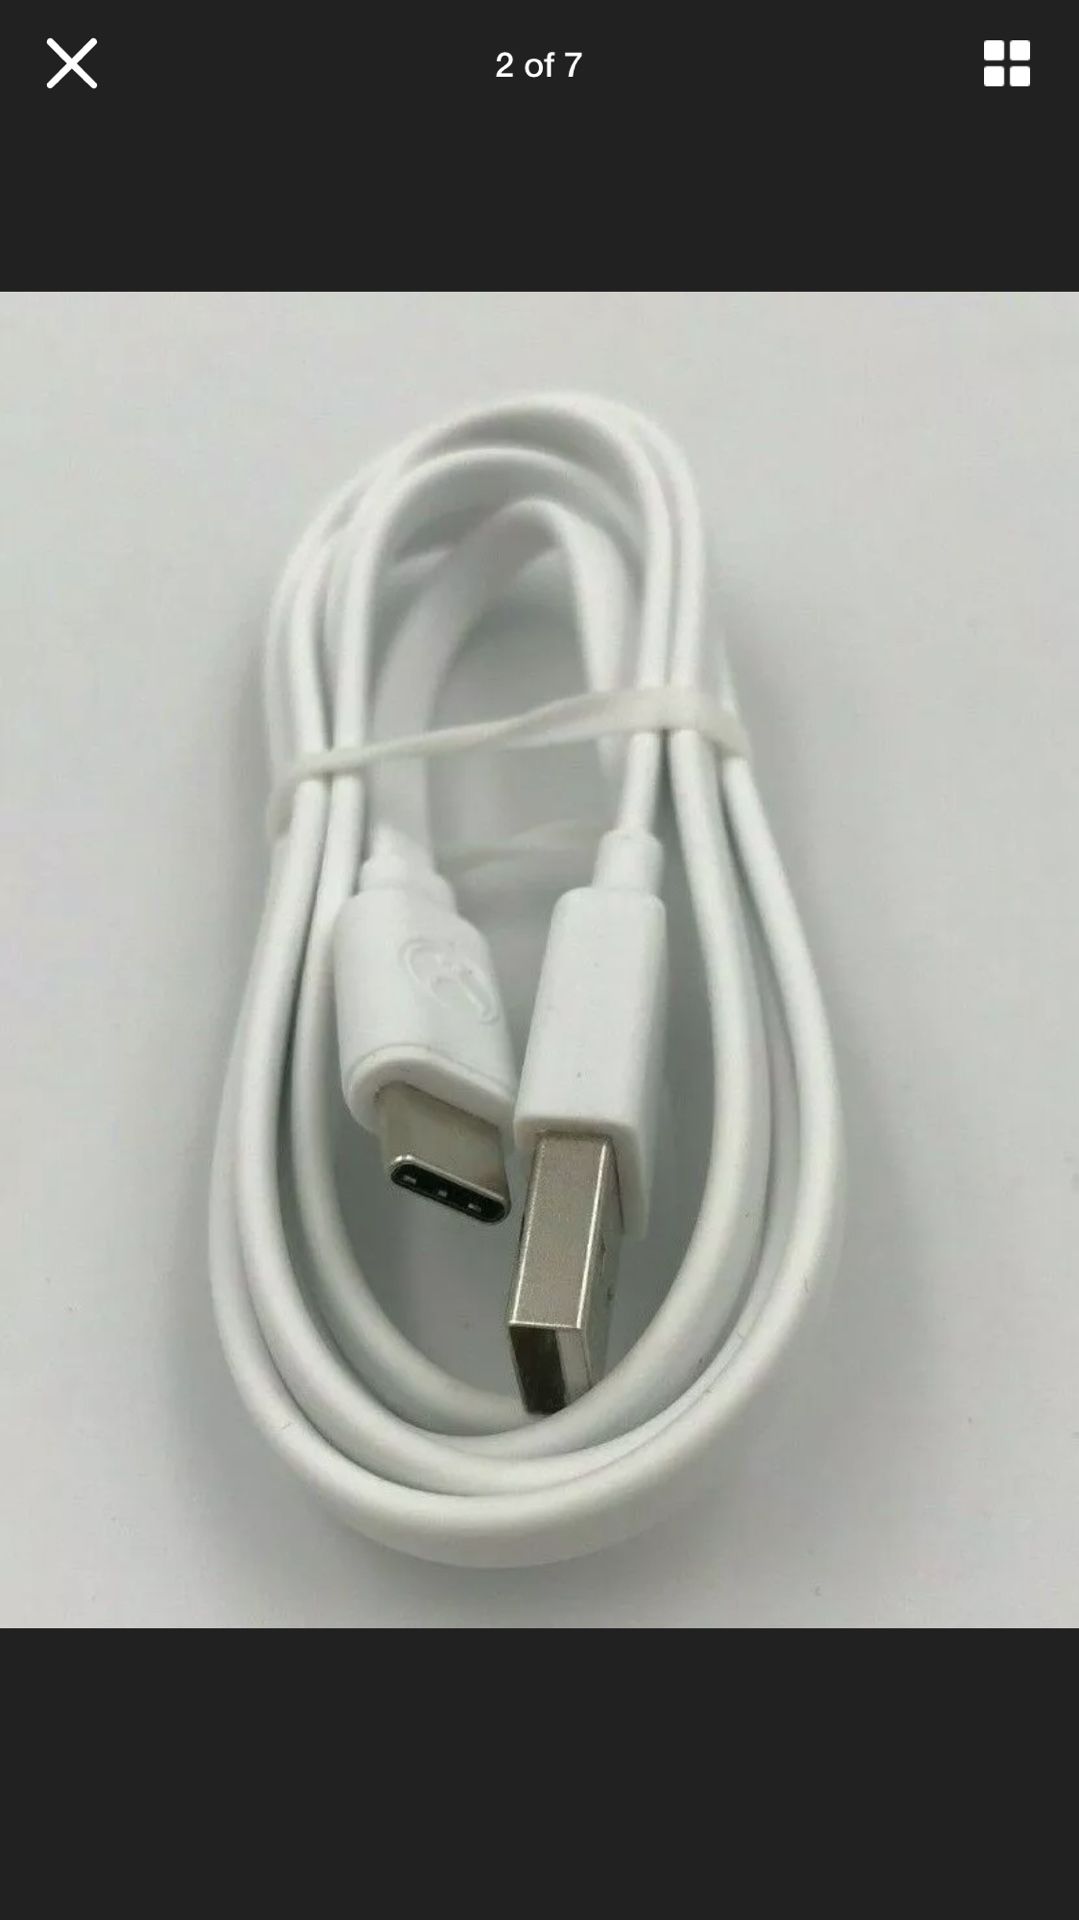 Flat Series USB to USB-C Cable 1m Length High Quality White Cable by Bon.elk